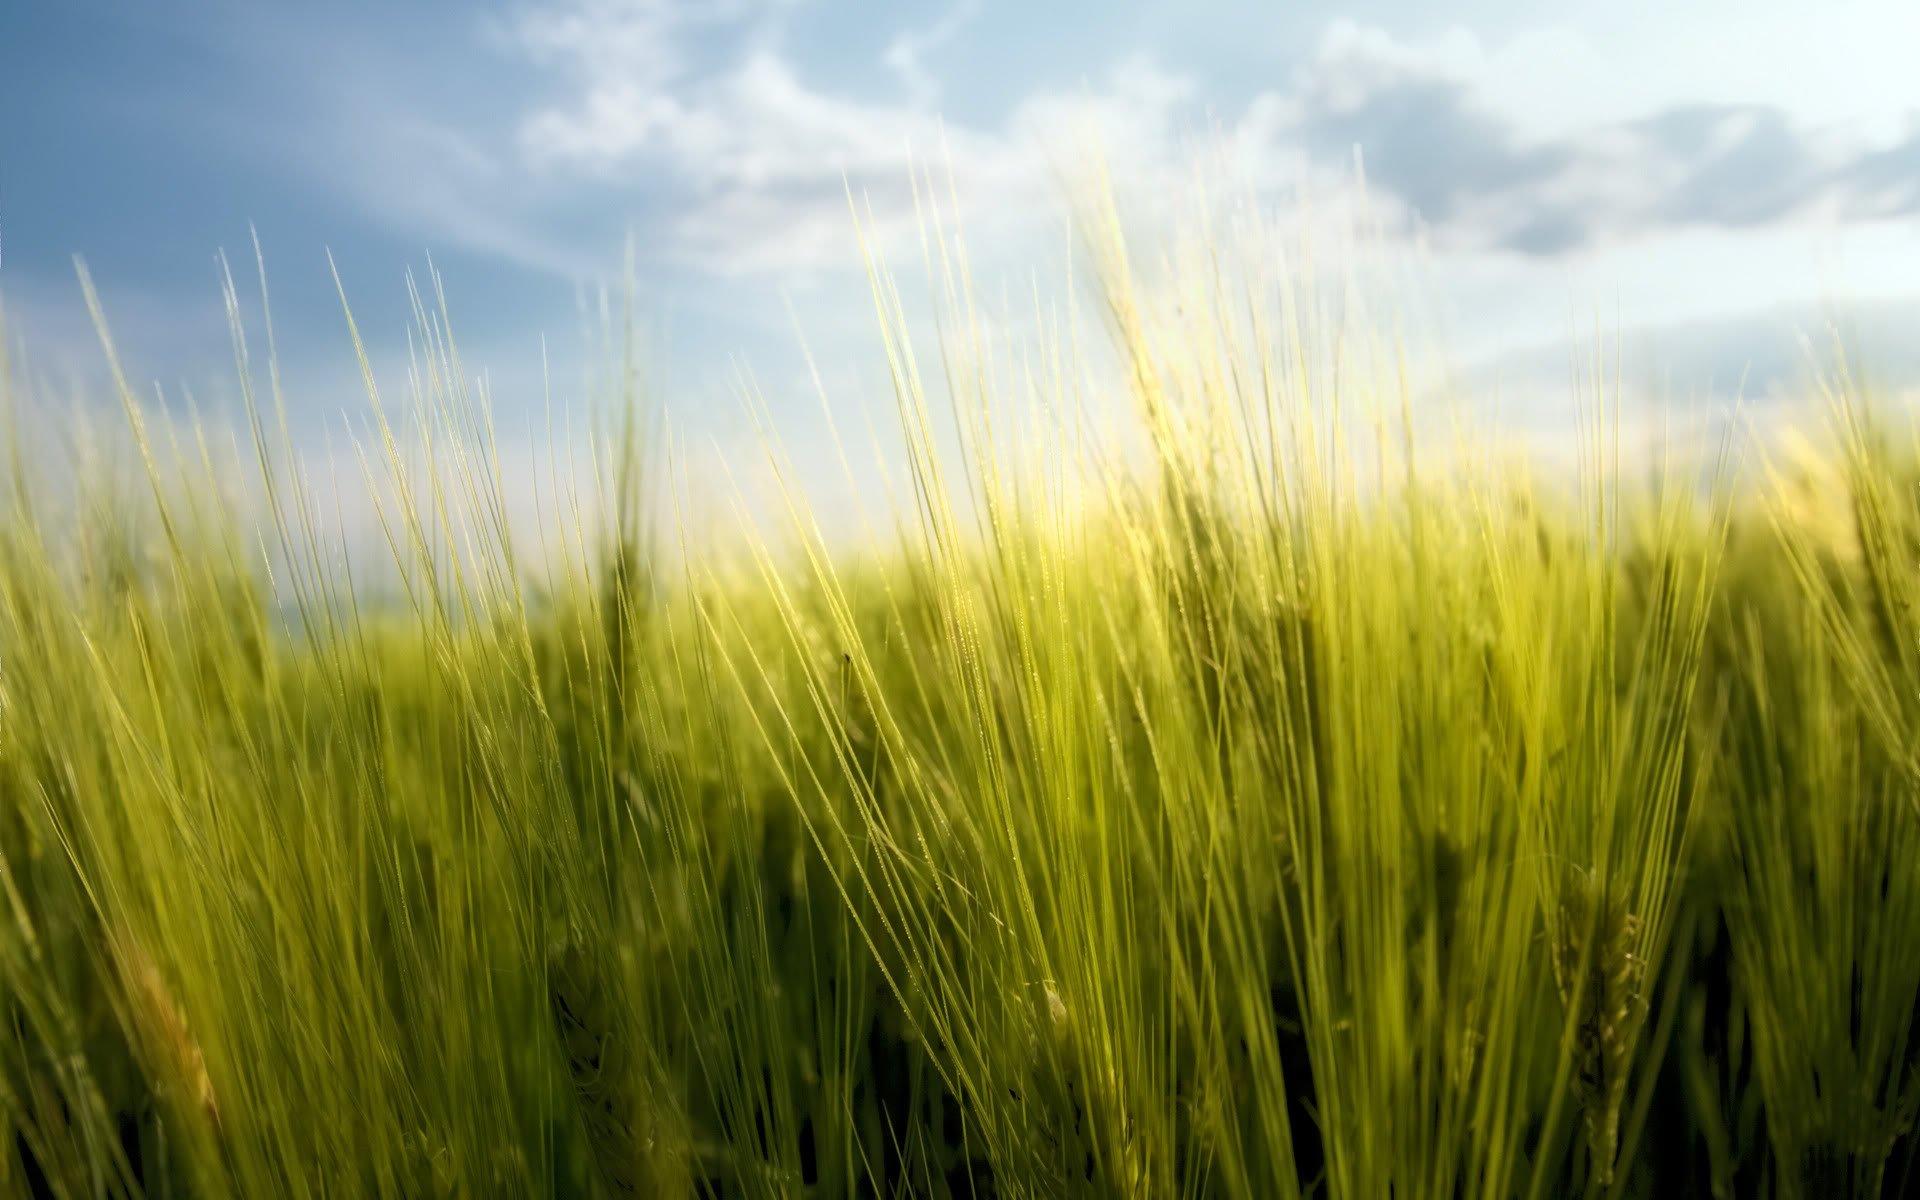 clouds, Landscapes, Nature, Grass, Fields, Wheat, Grain, Macro, Skyscapes Wallpaper